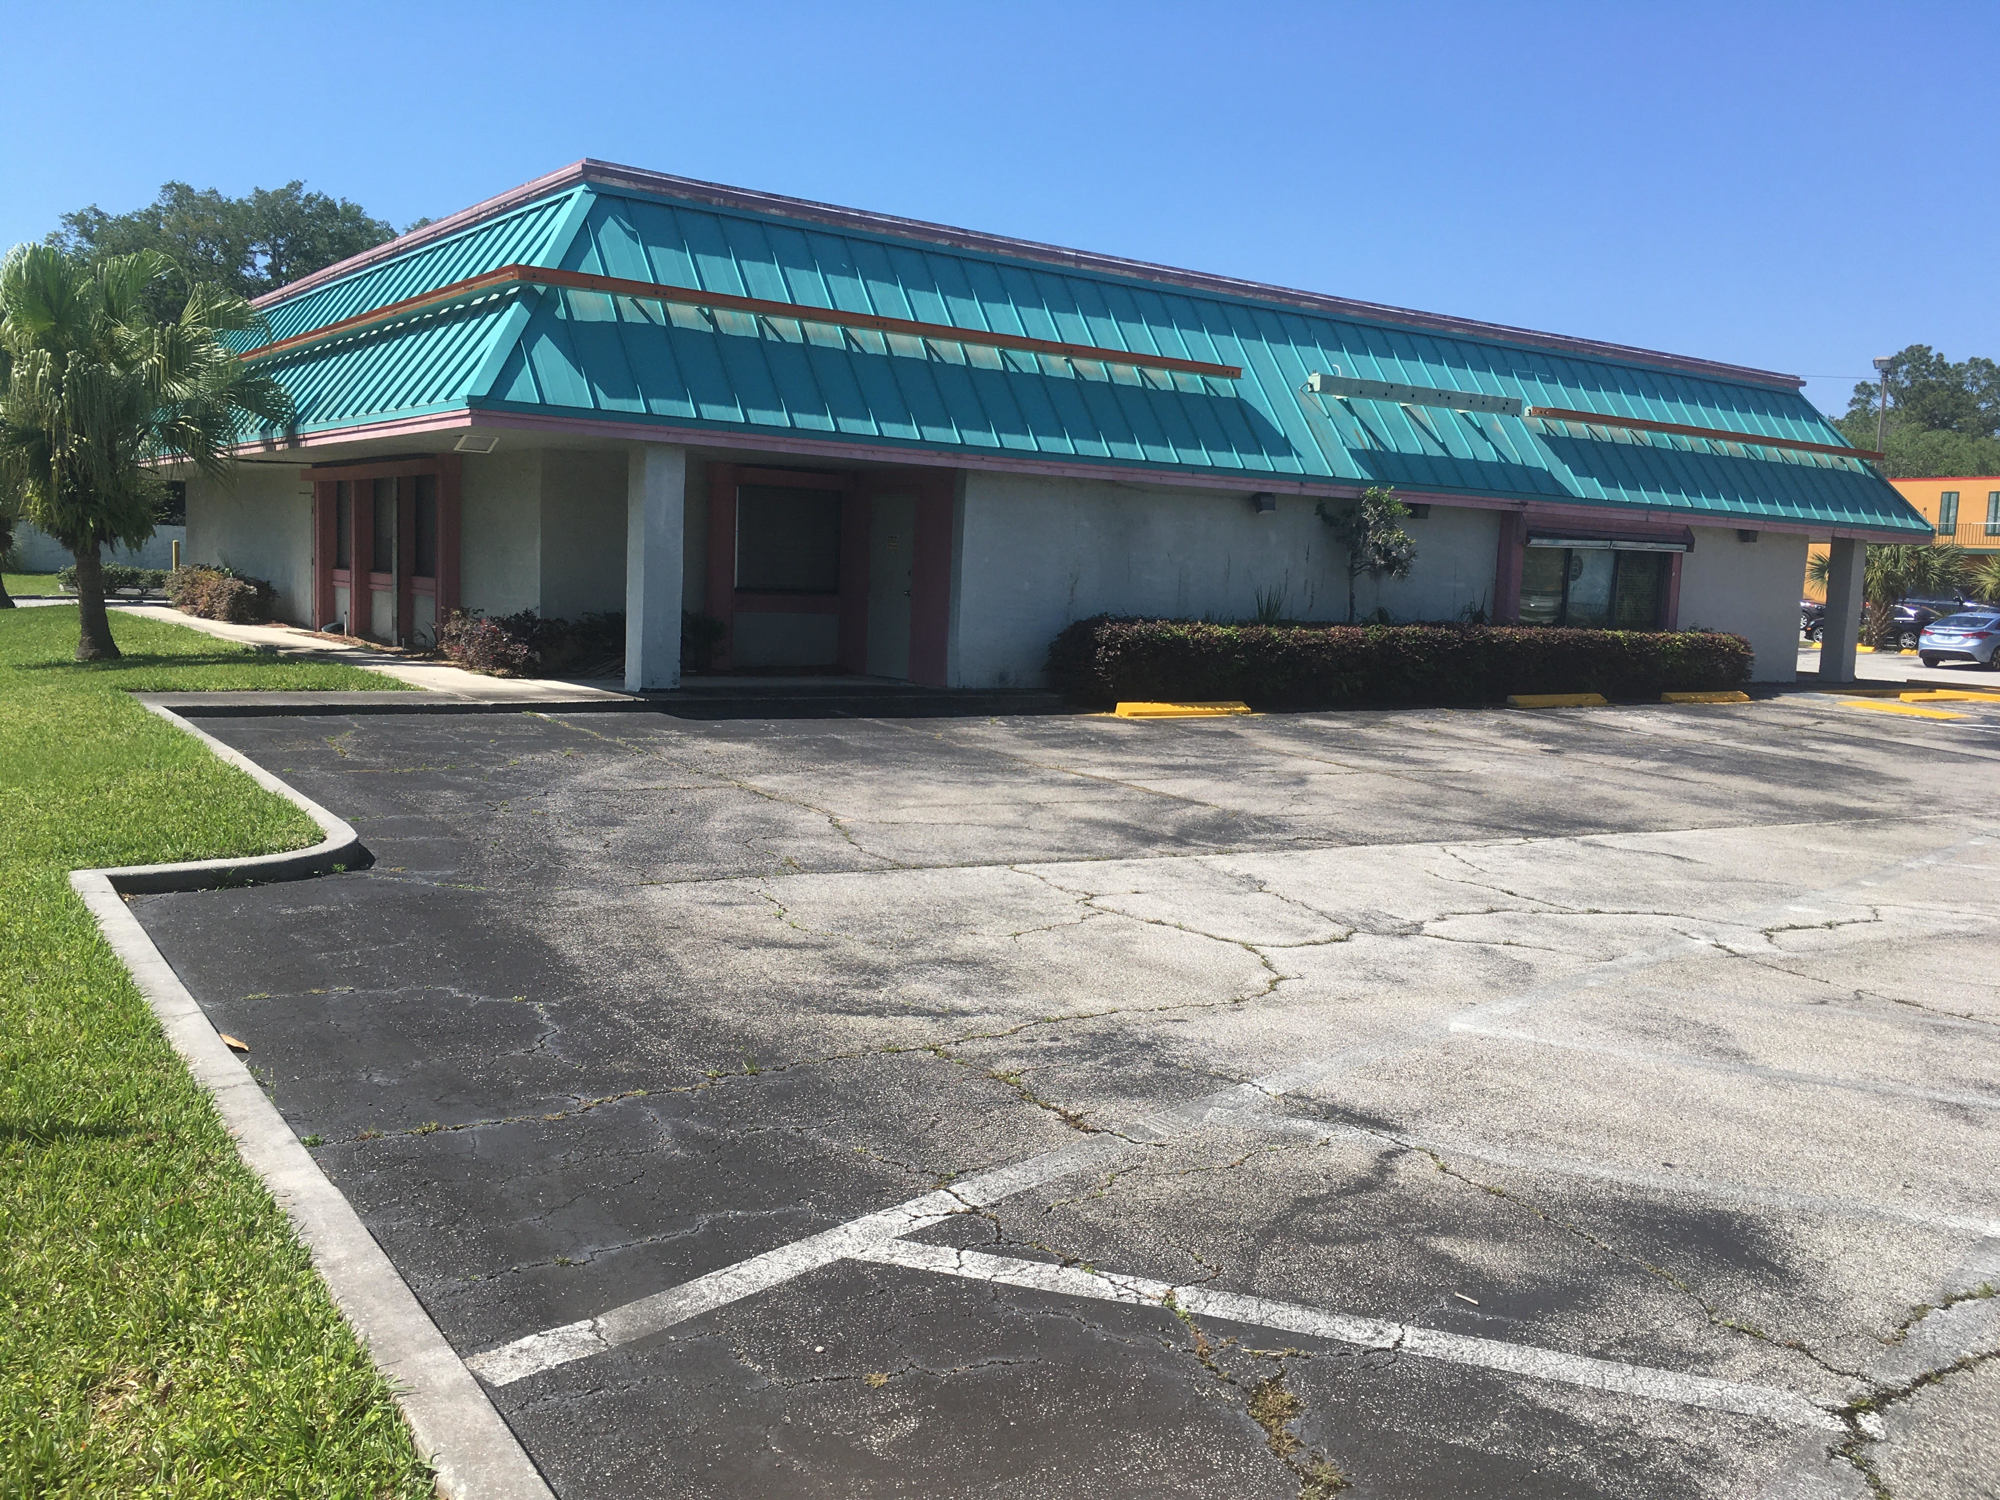 Plans to transform this former Village Inn into a sports restaurant have met with neighborhood concerns about traffic, parking and noise.